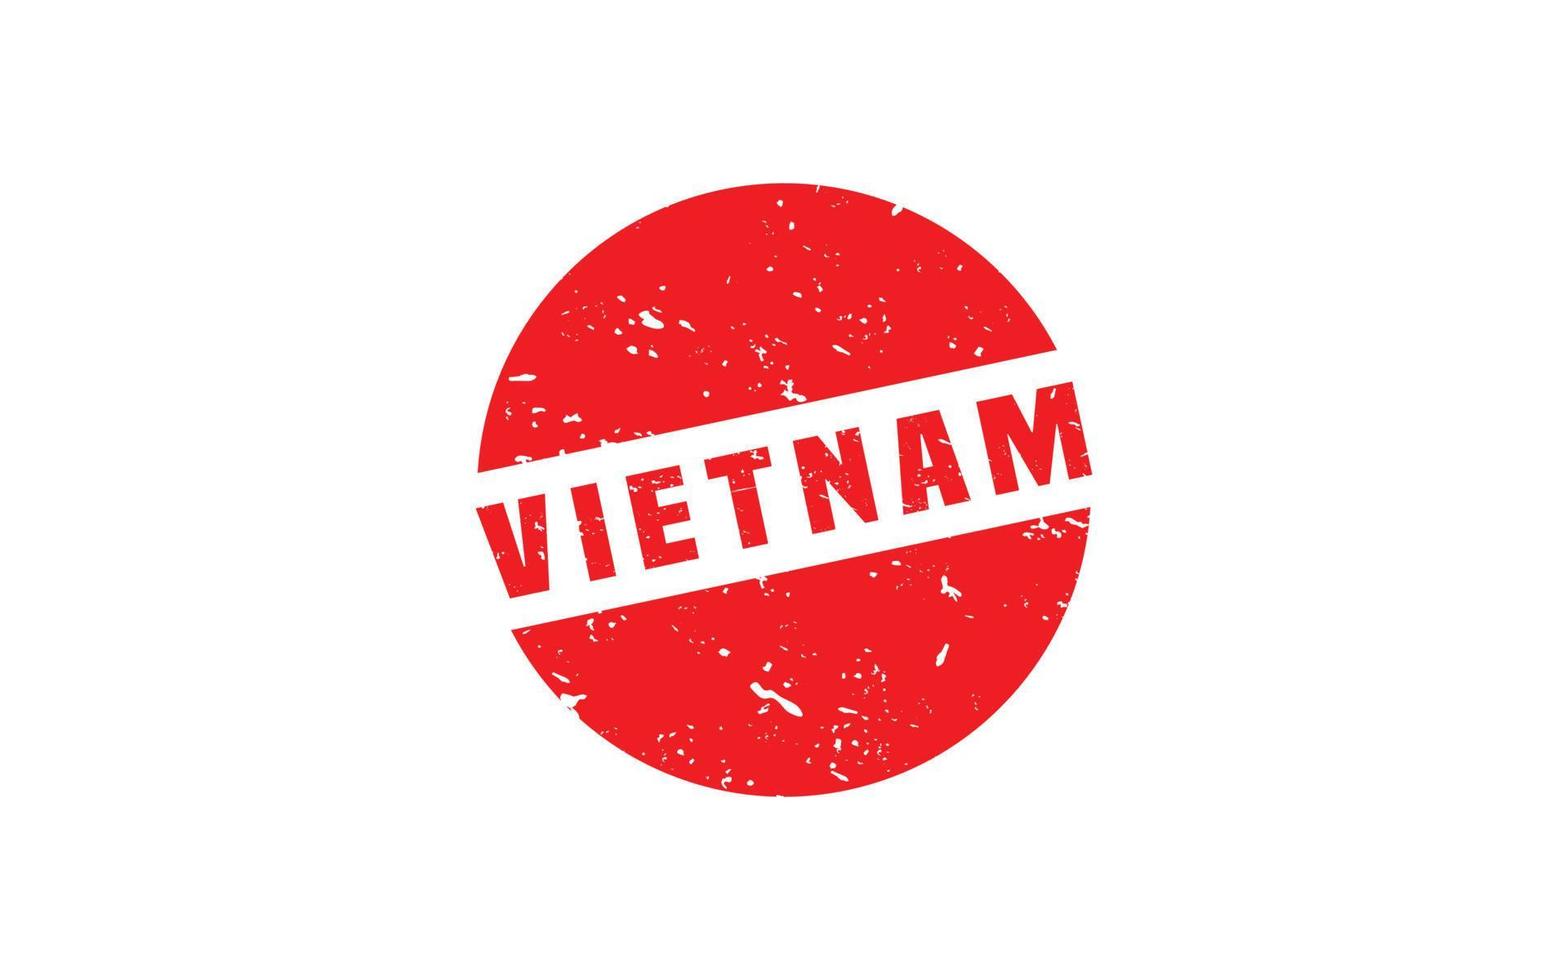 VIETNAM stamp rubber with grunge style on white background vector